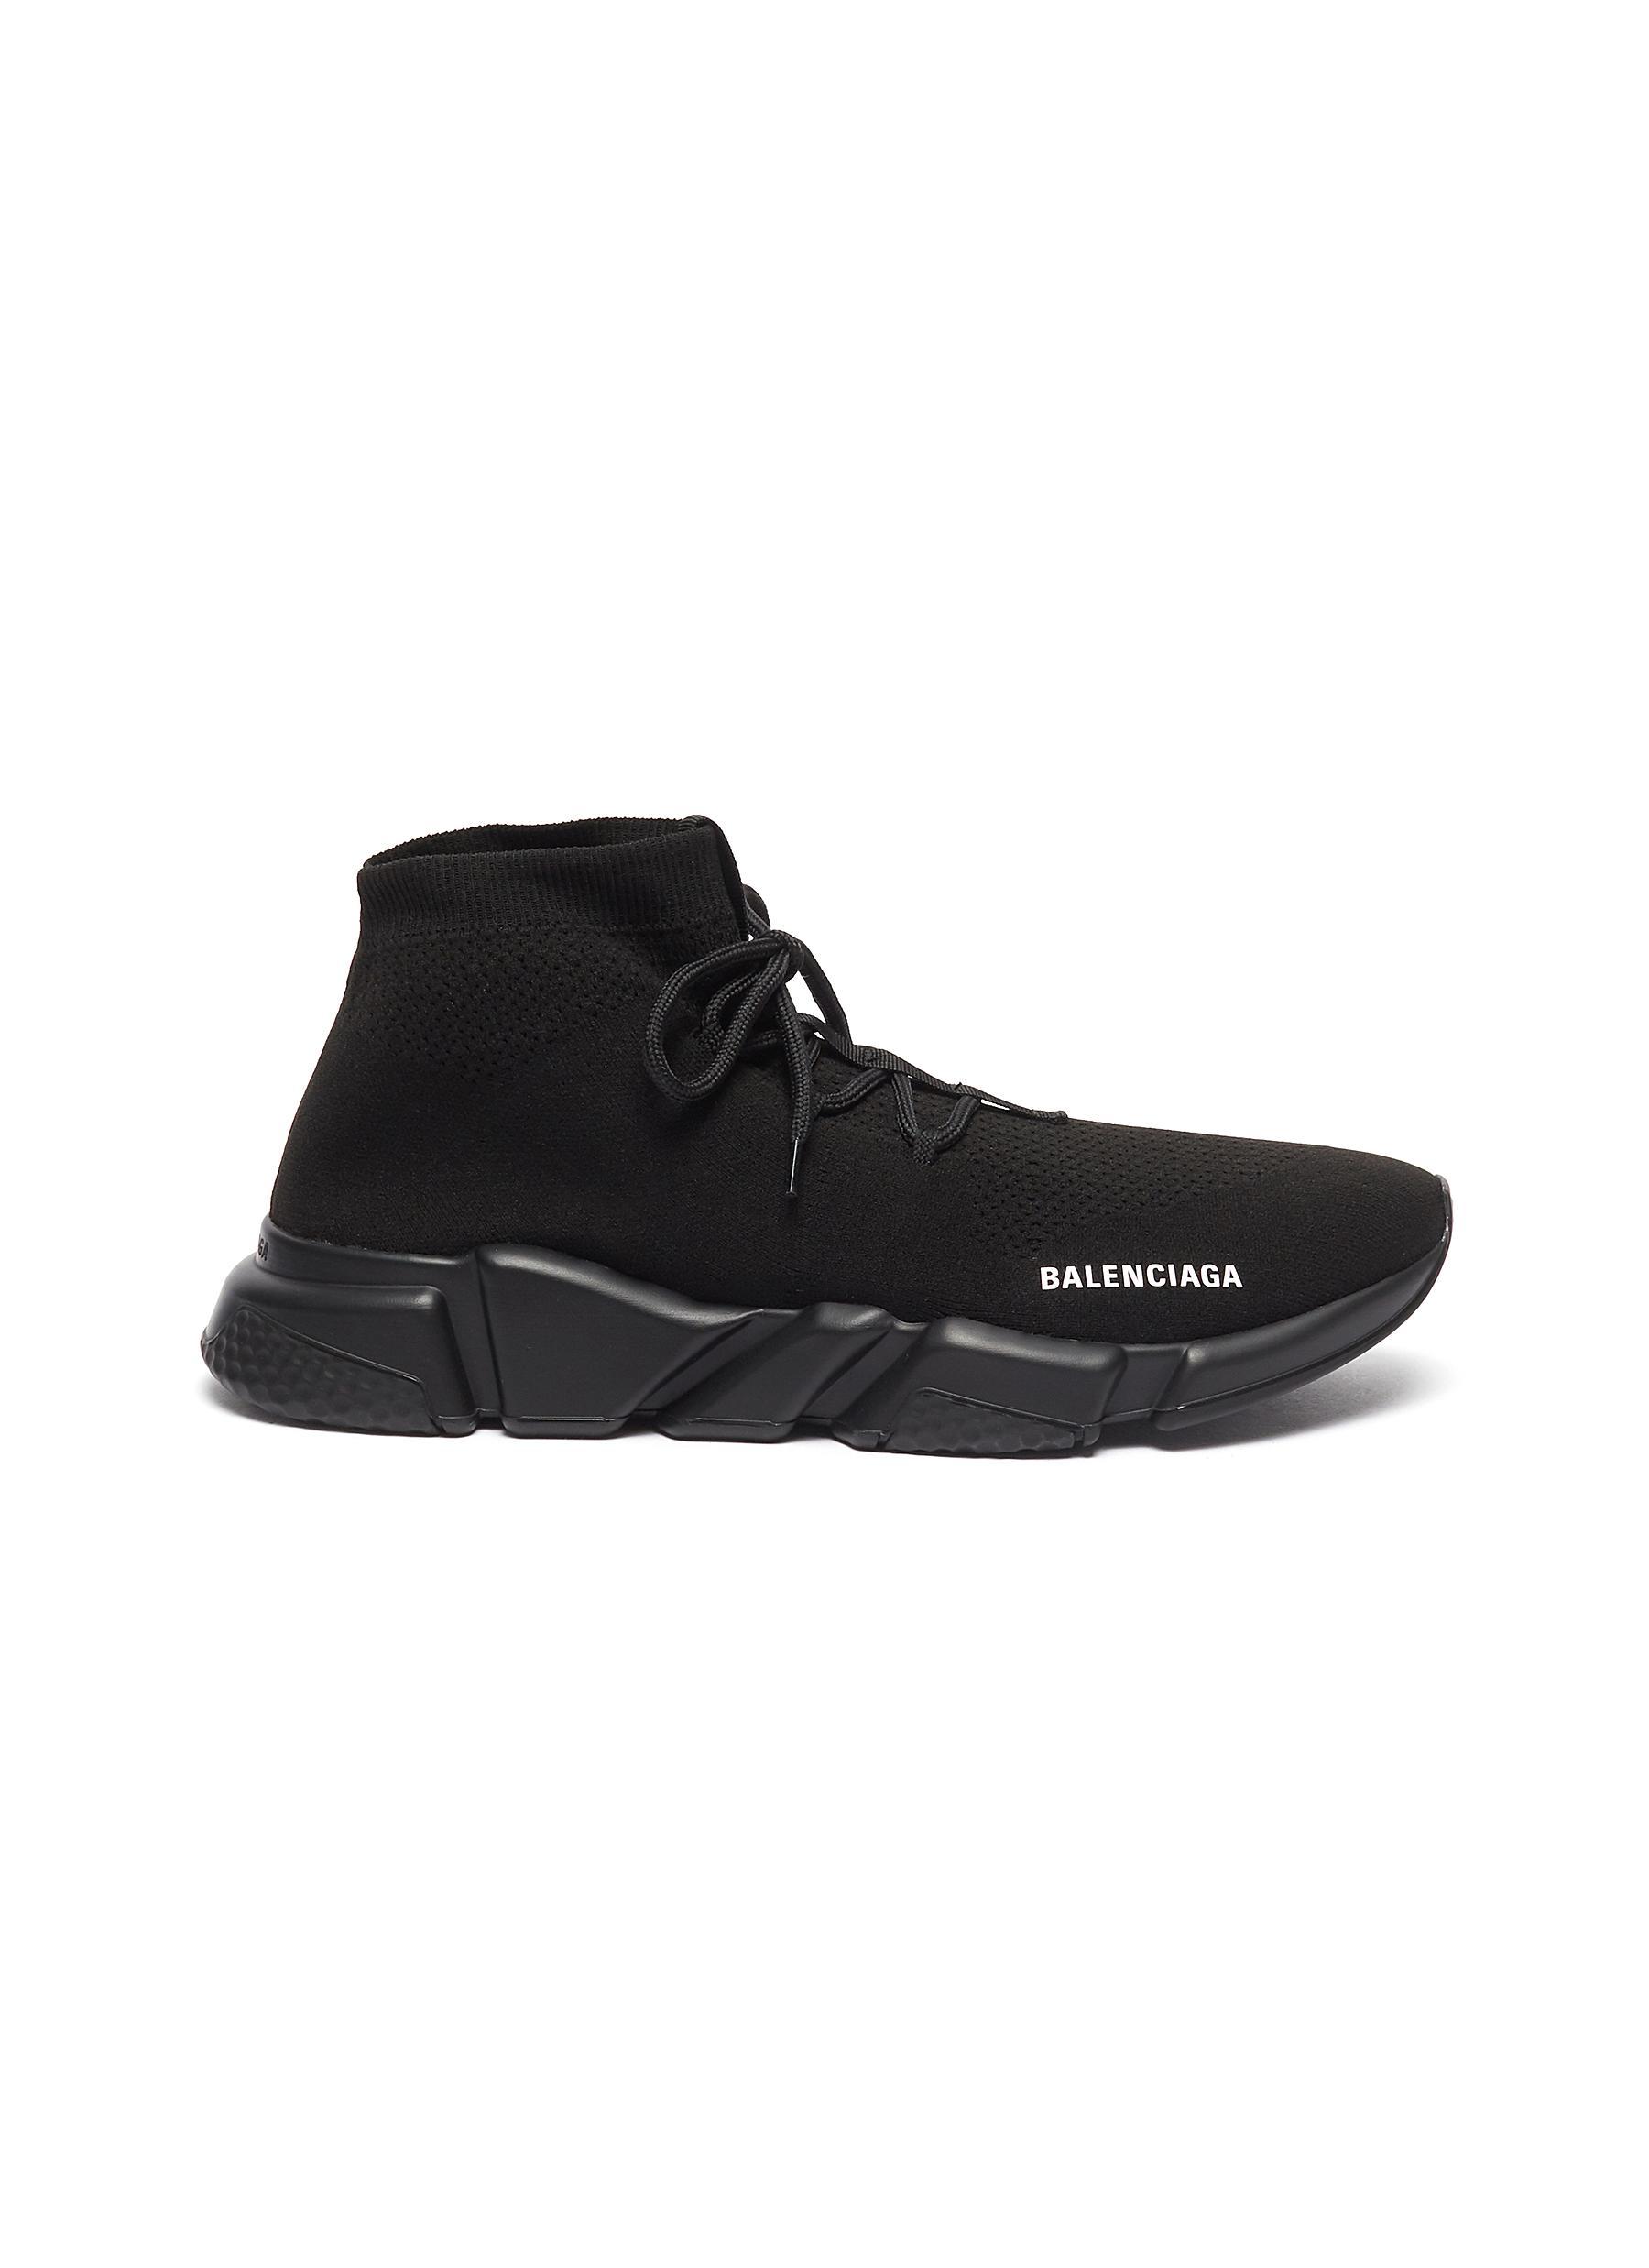 Balenciaga Rubber 'speed' Lace-up Knit Sneakers in Black for Men - Lyst